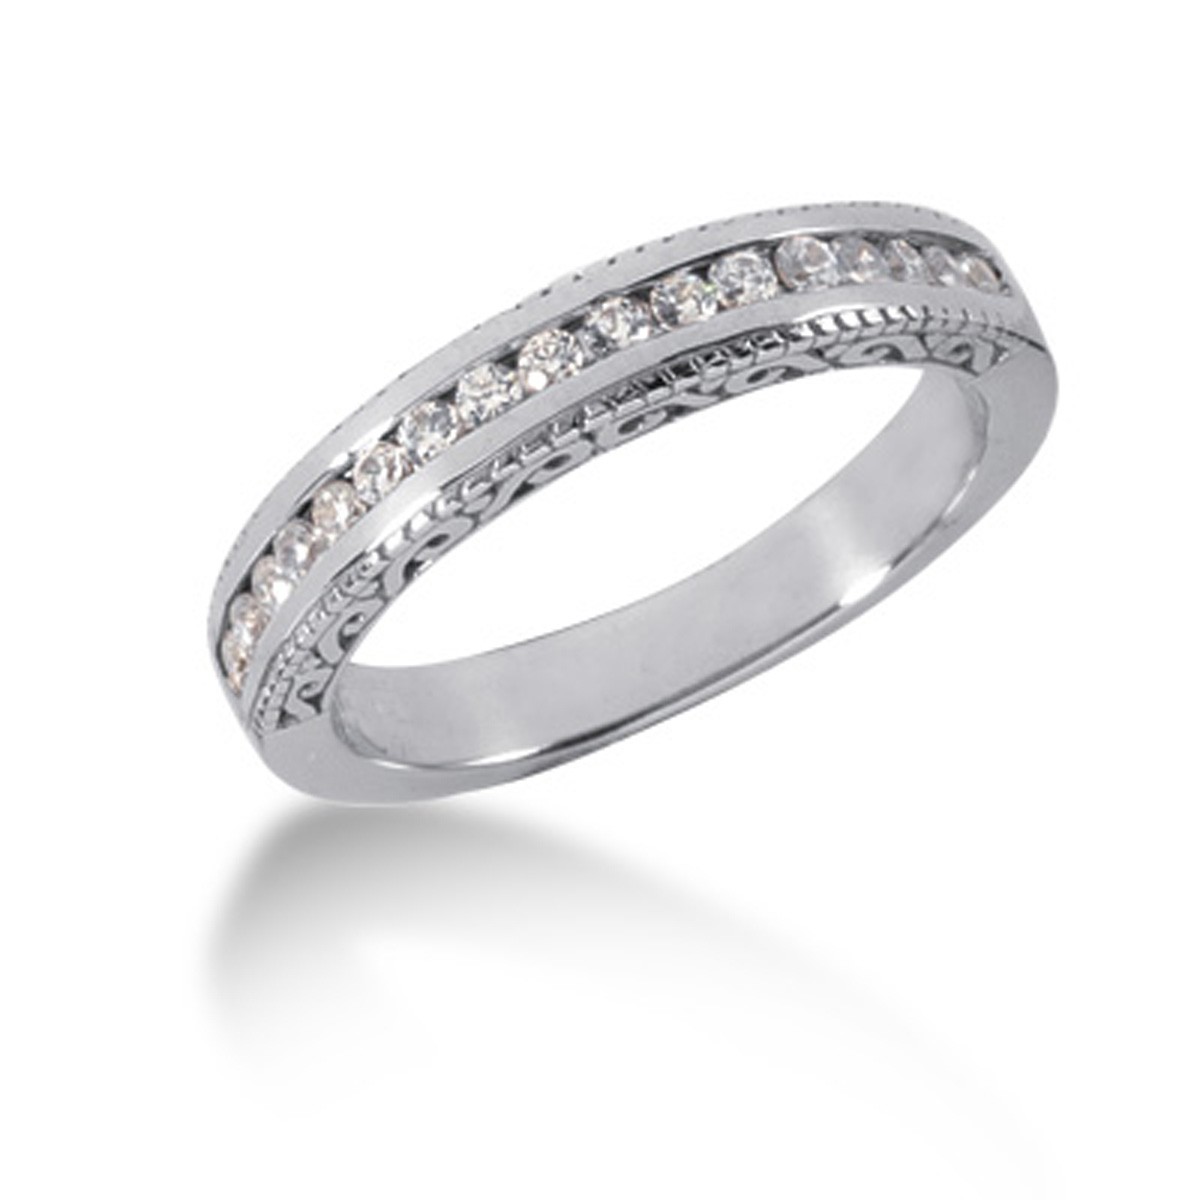 Engraved Diamond Channel Set Wedding Ring Band in 14k